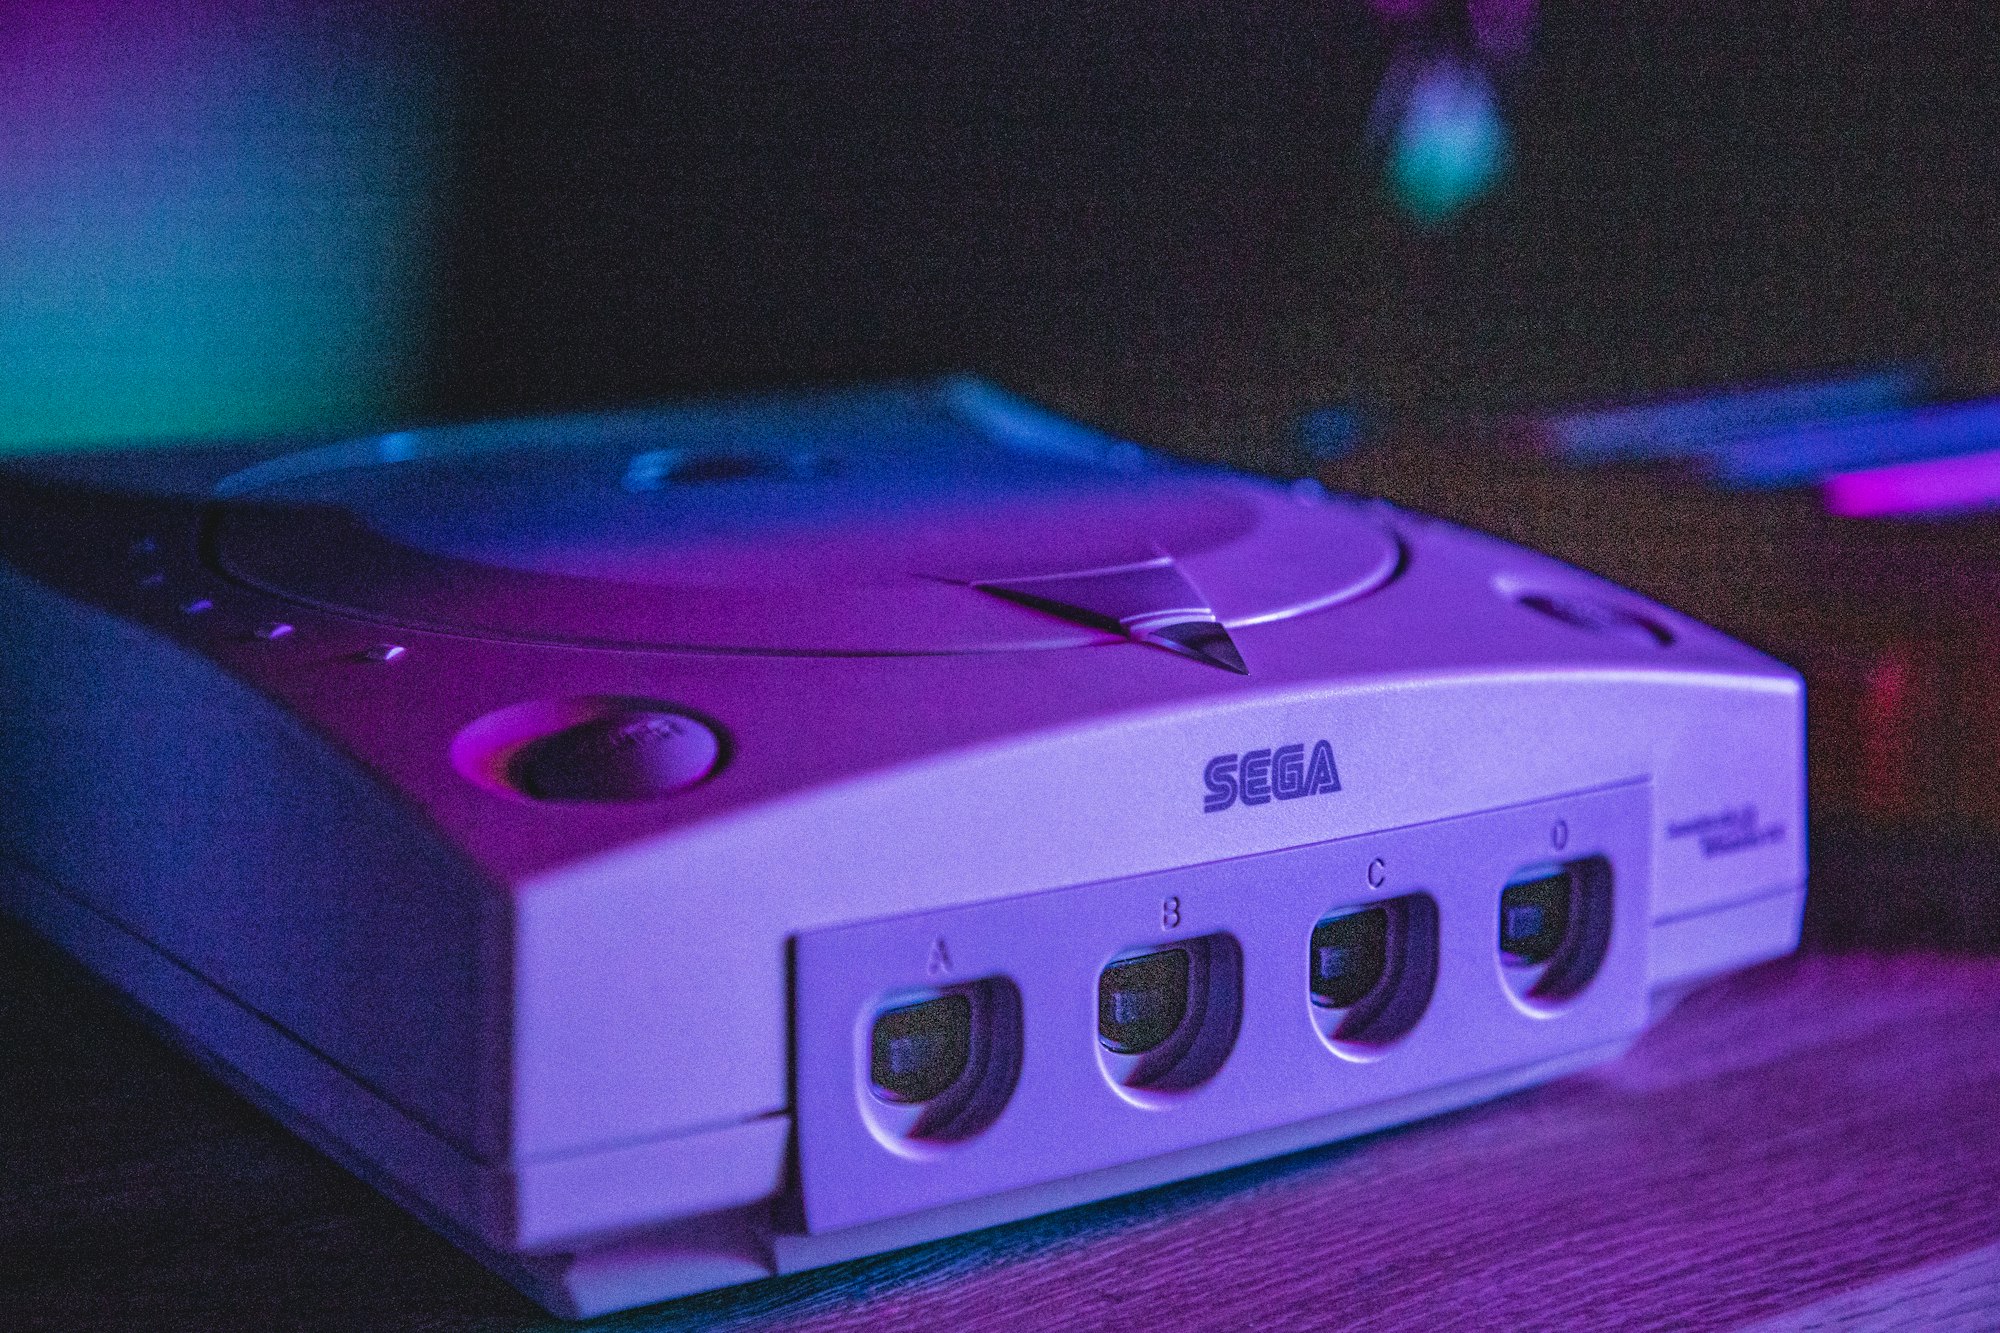 Bring on the Dreamcast Mini